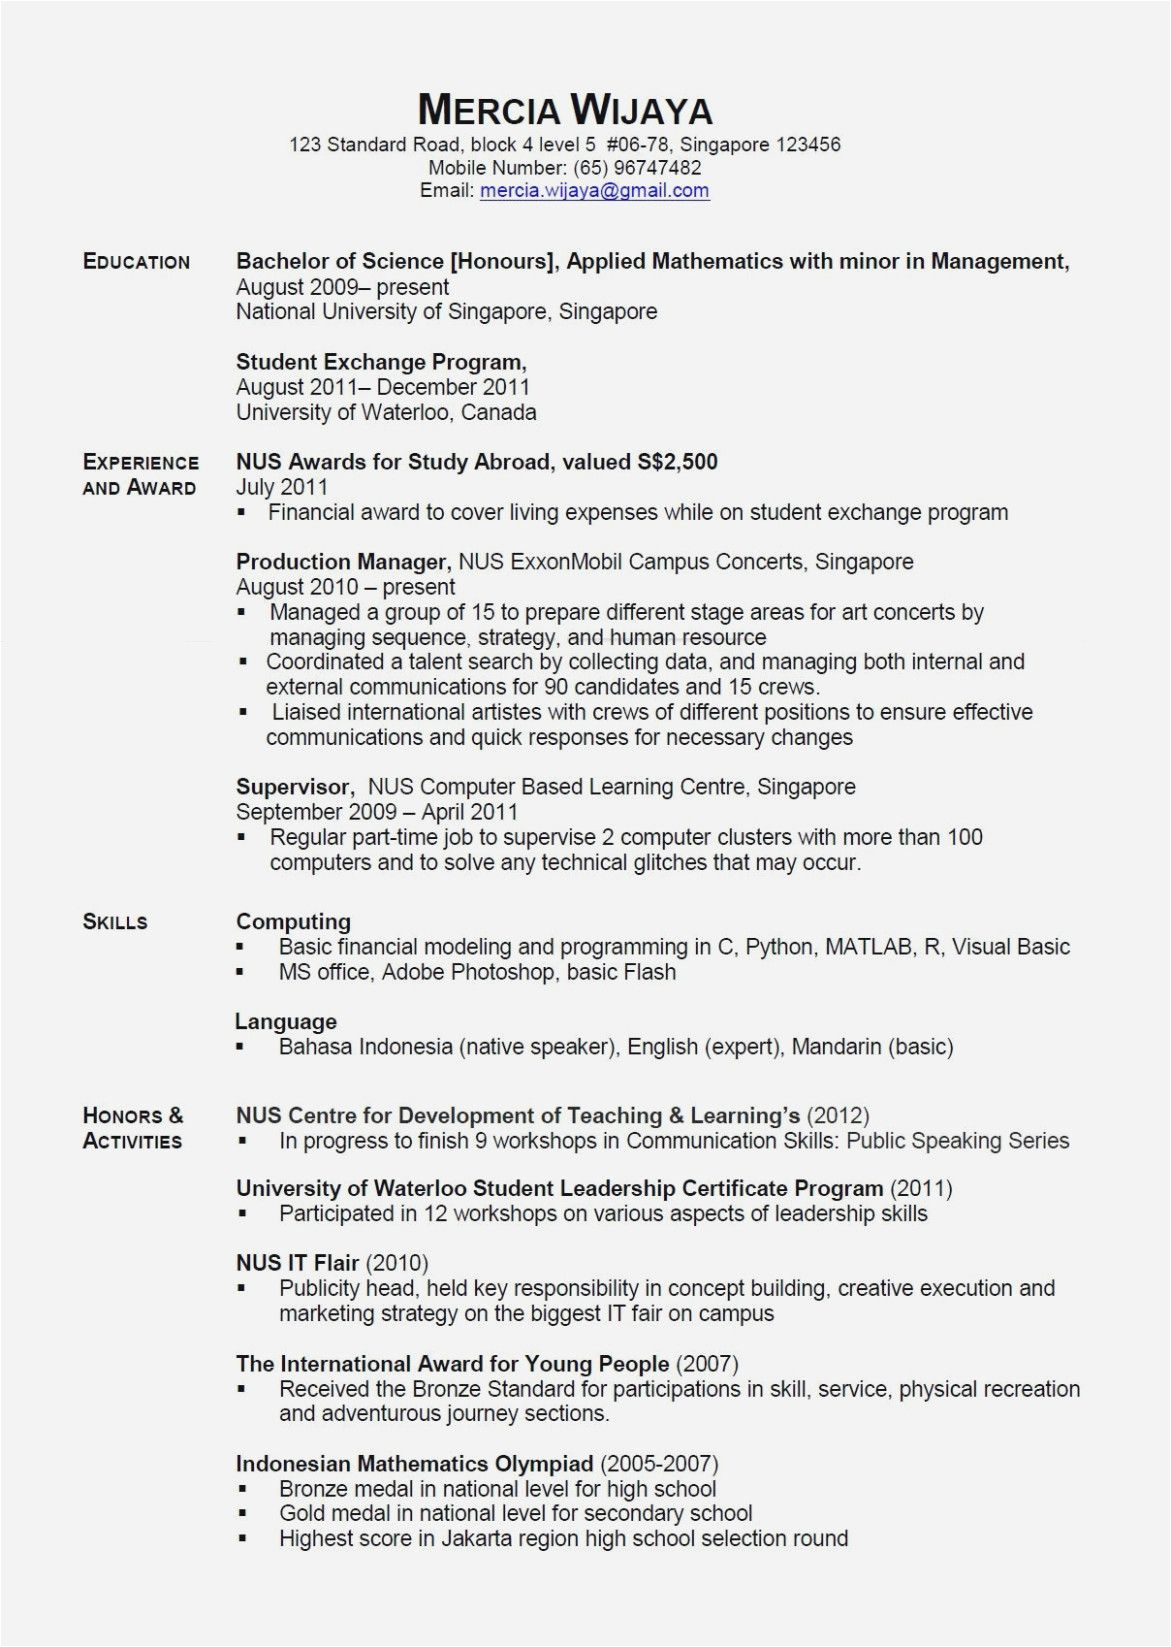 Sample Resume Cover Letter for Mom Returning to Work 5 Importance Talking Math Home Cover Letter for Stay at Home Mom